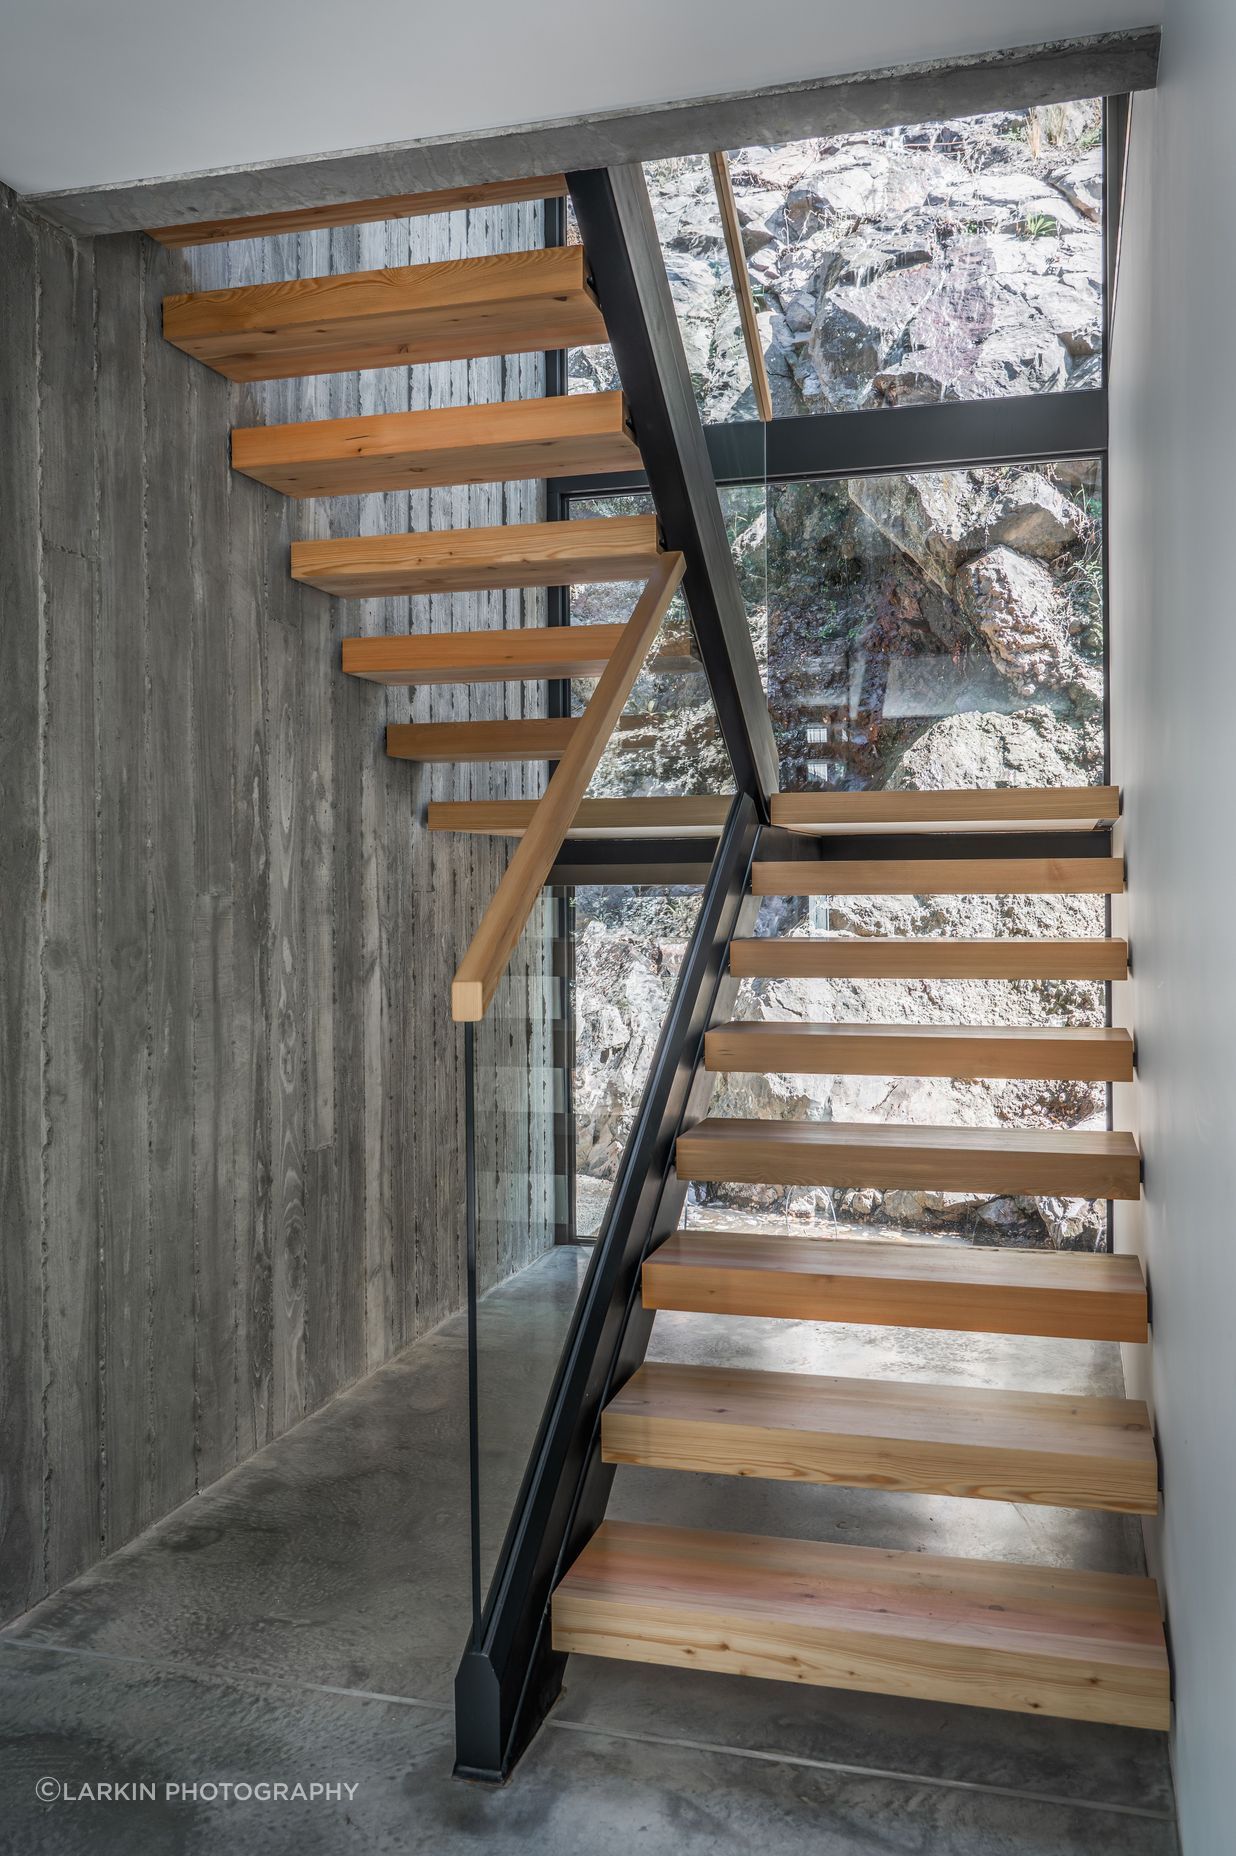 Double-height glazing exposes the rugged cliff face upon entry, forming a textural, organic backdrop to the timber staircase.